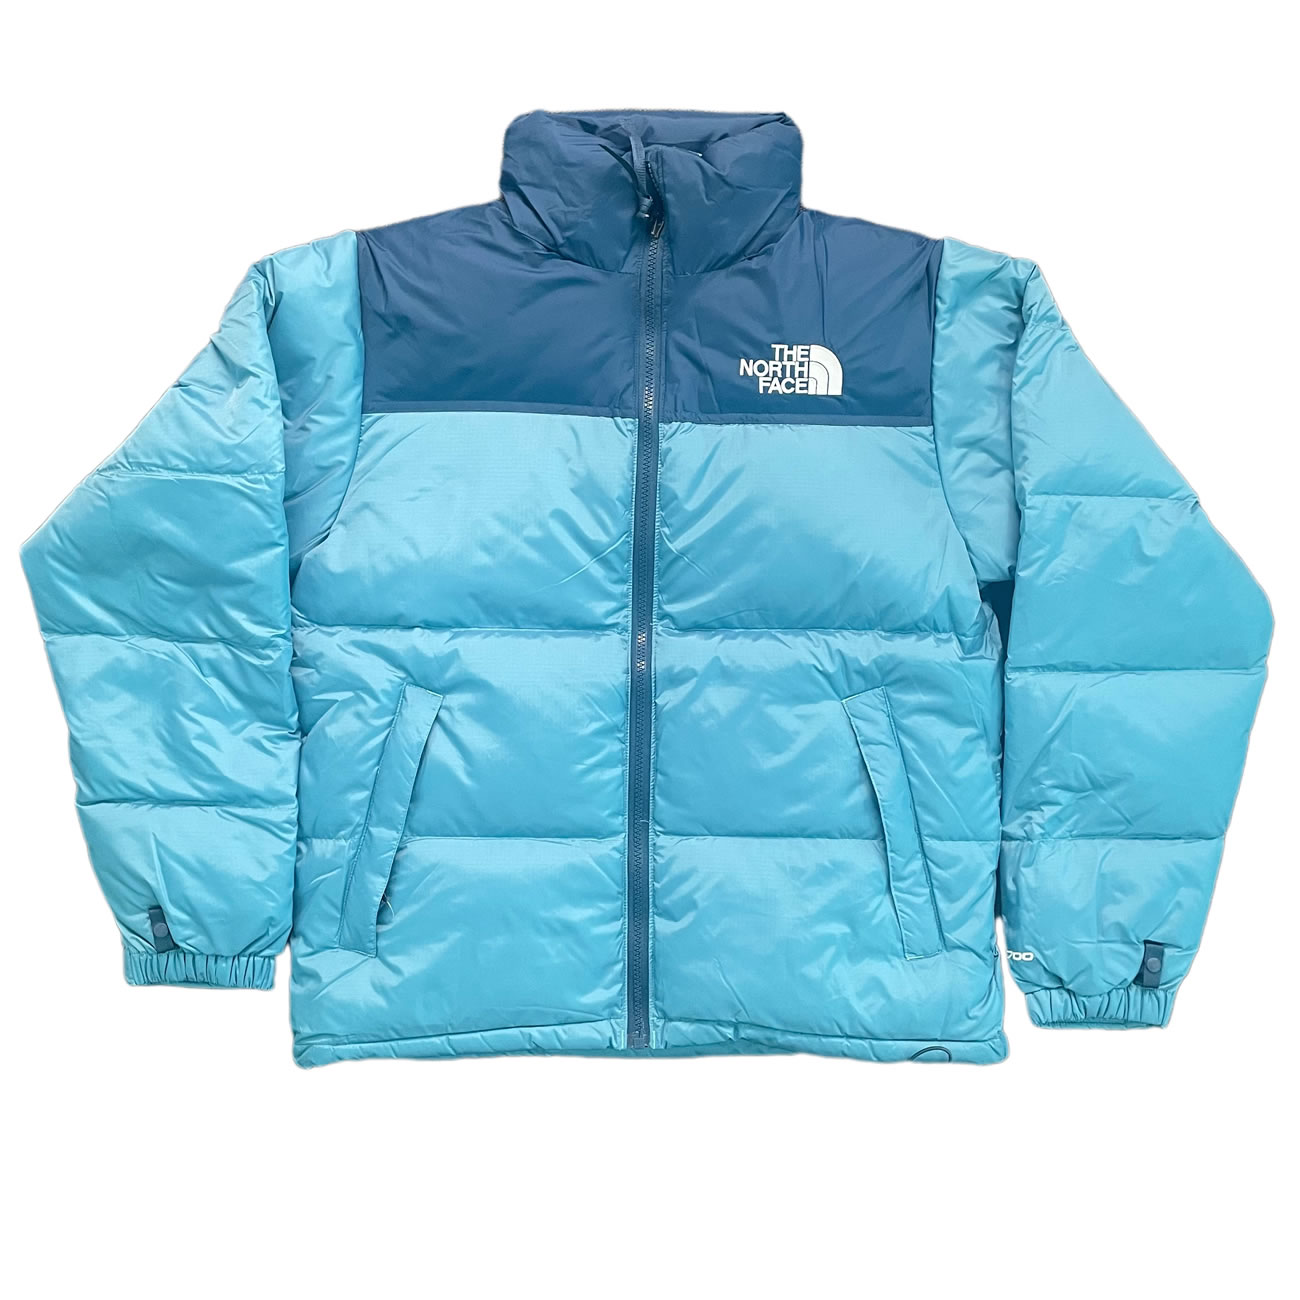 The North Face 1996 Retro Nuptse Packable Jacket Fw21 (14) - newkick.org